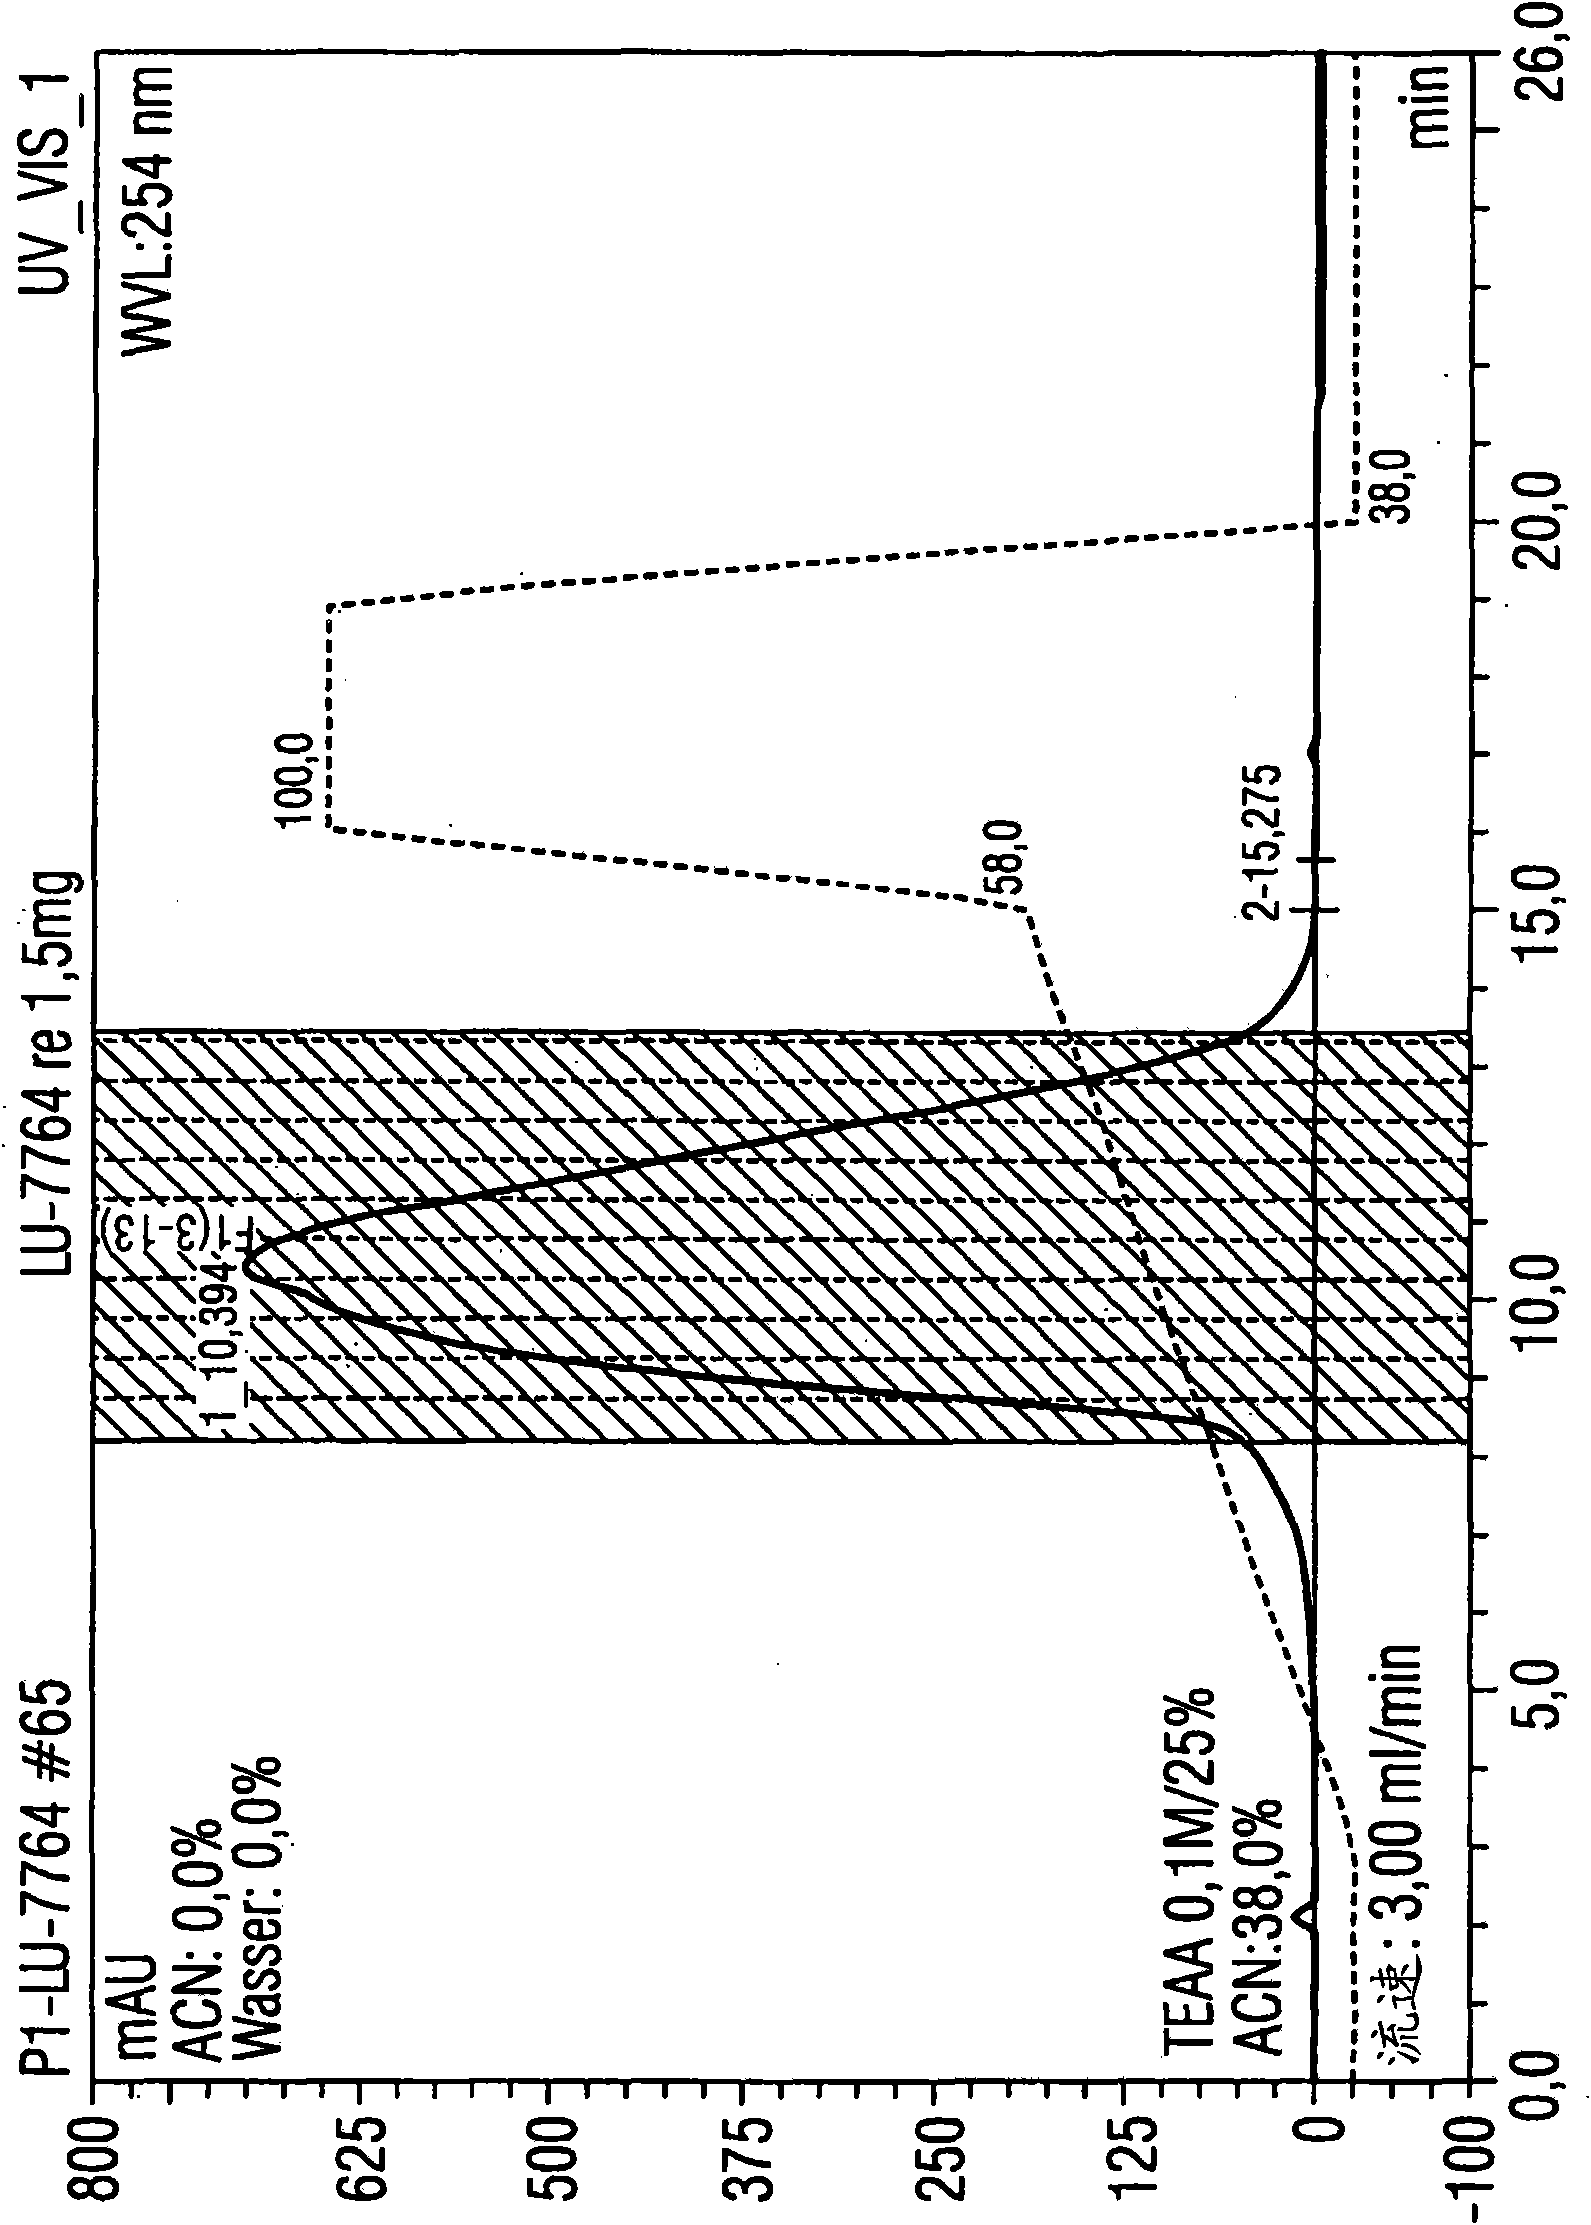 Method for purifying rna on a preparative scale by means of hplc